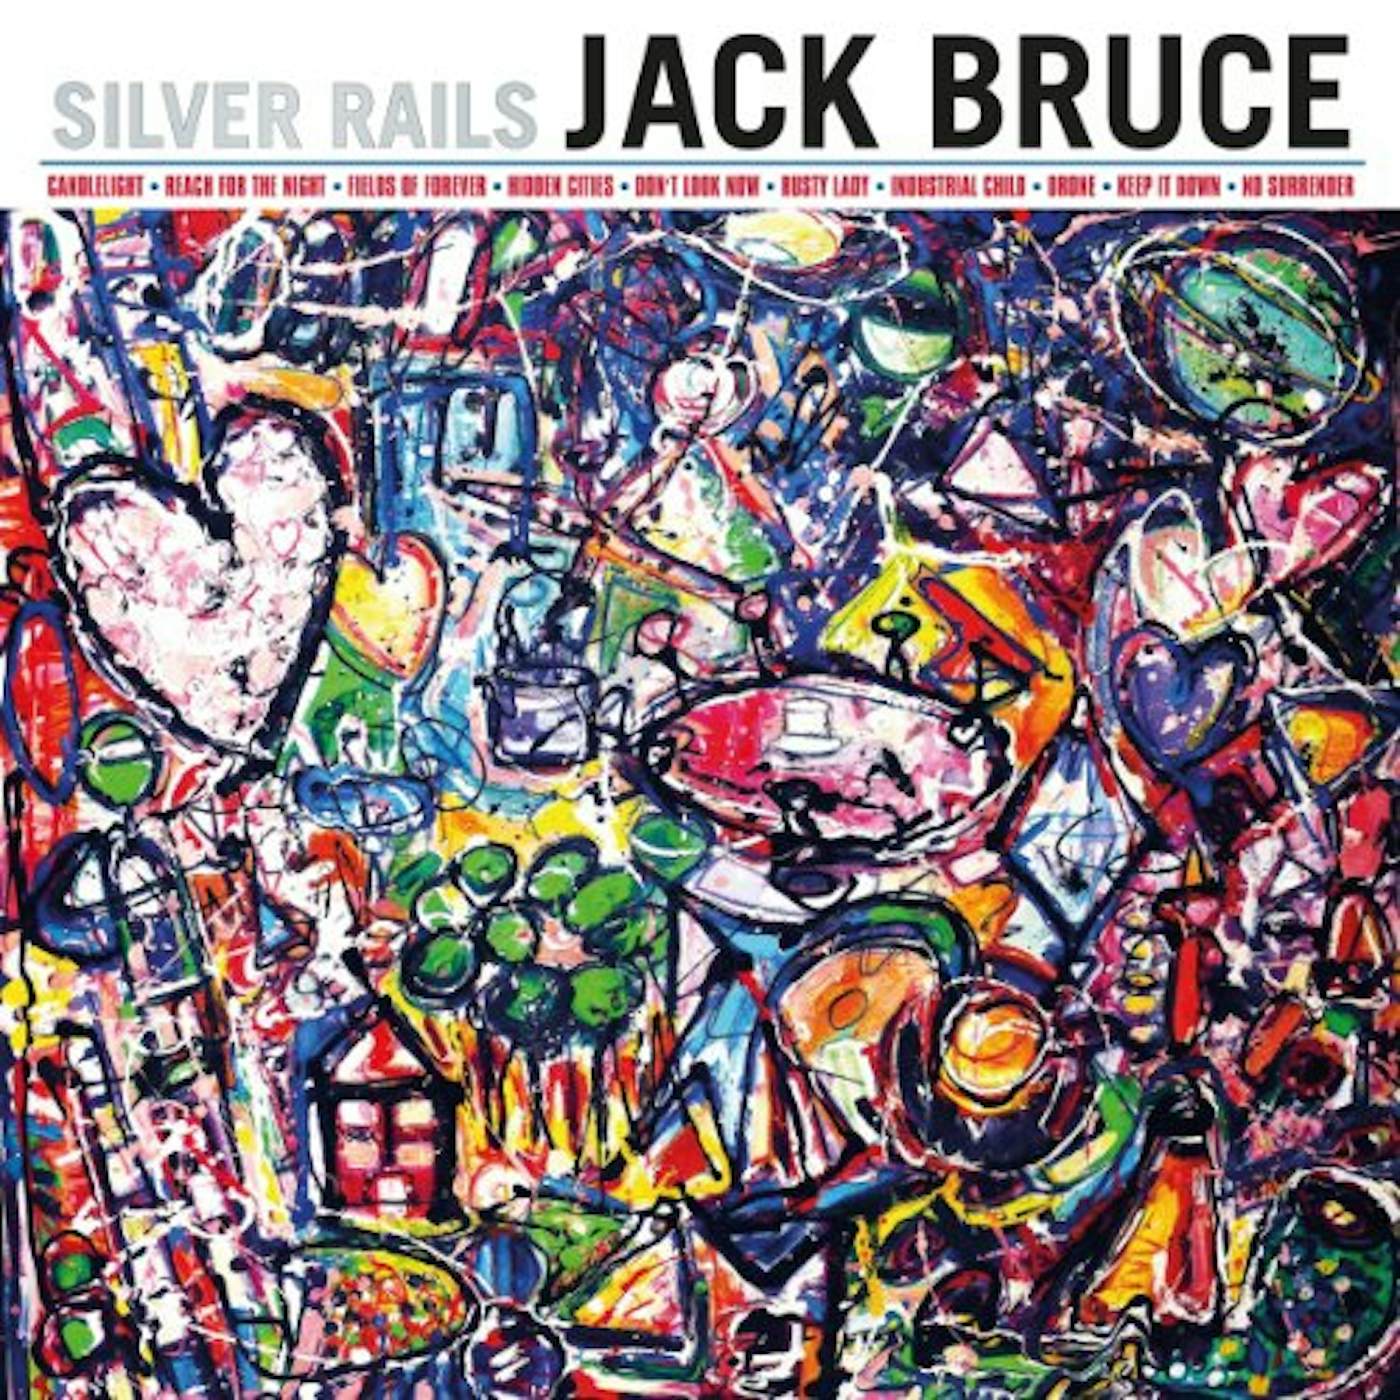 Jack Bruce SILVER RAILS: DELUXE LIMITED EDITION CD